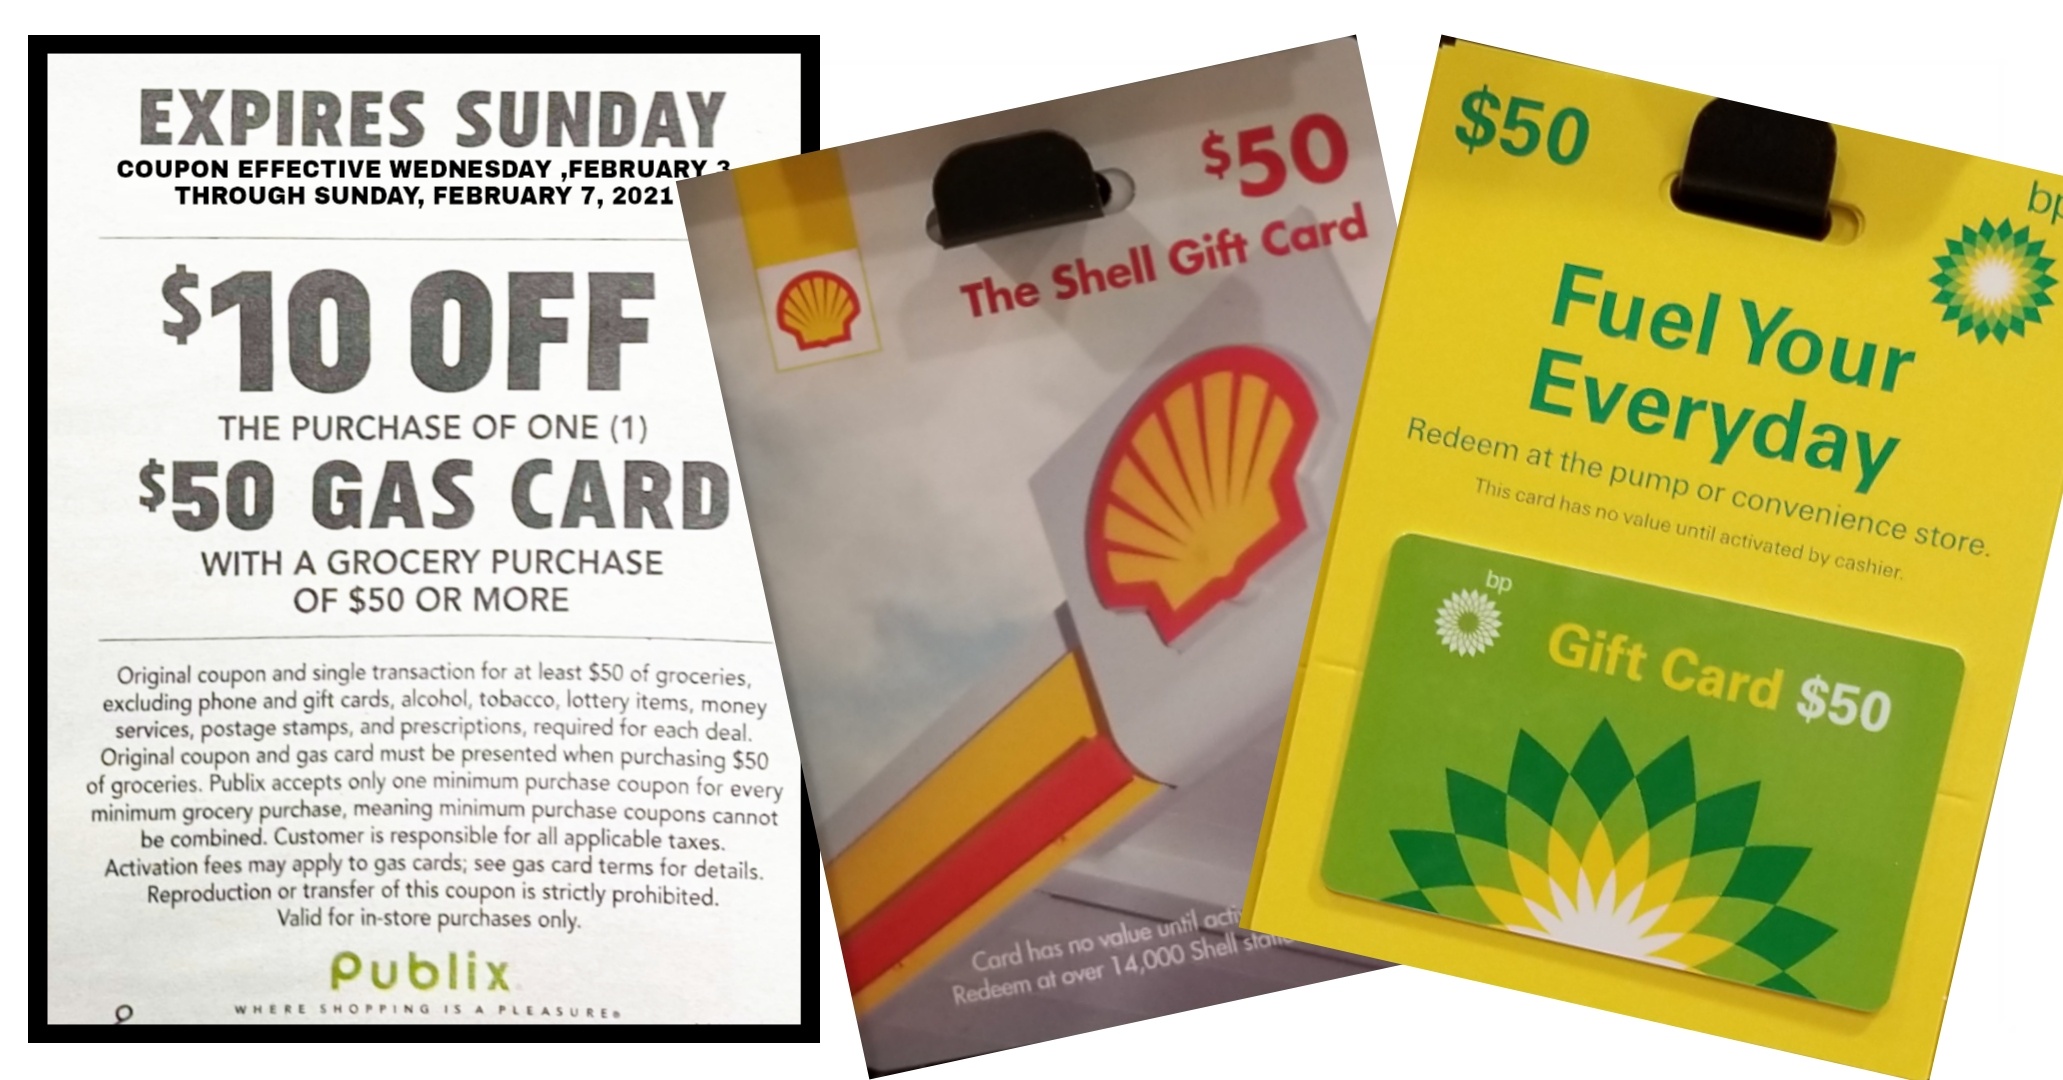  10 Off 50 Gas Card Wyb 50 Or More Grocery Purchase valid 2 3 To 2 